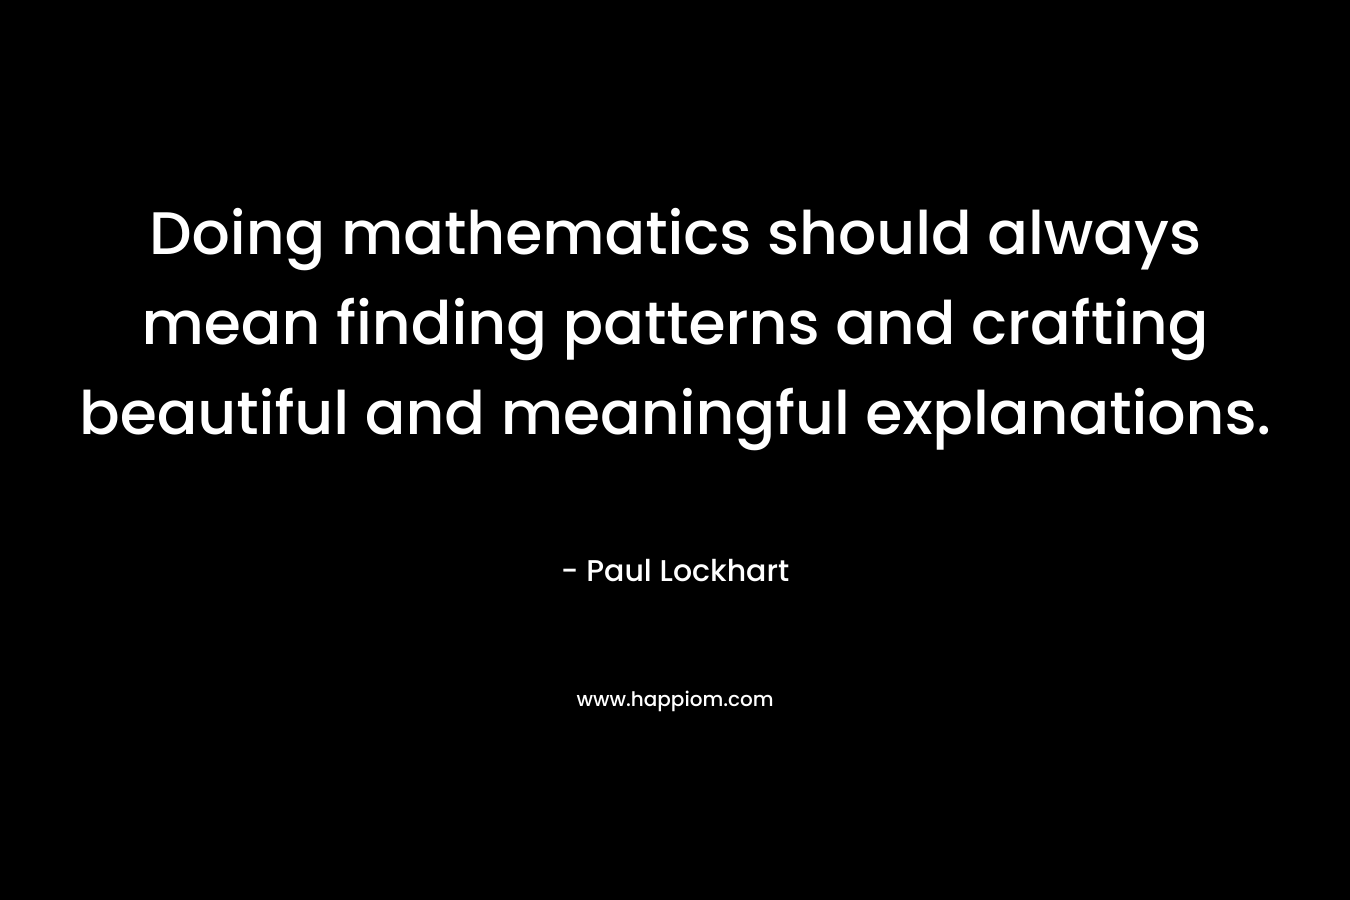 Doing mathematics should always mean finding patterns and crafting beautiful and meaningful explanations.